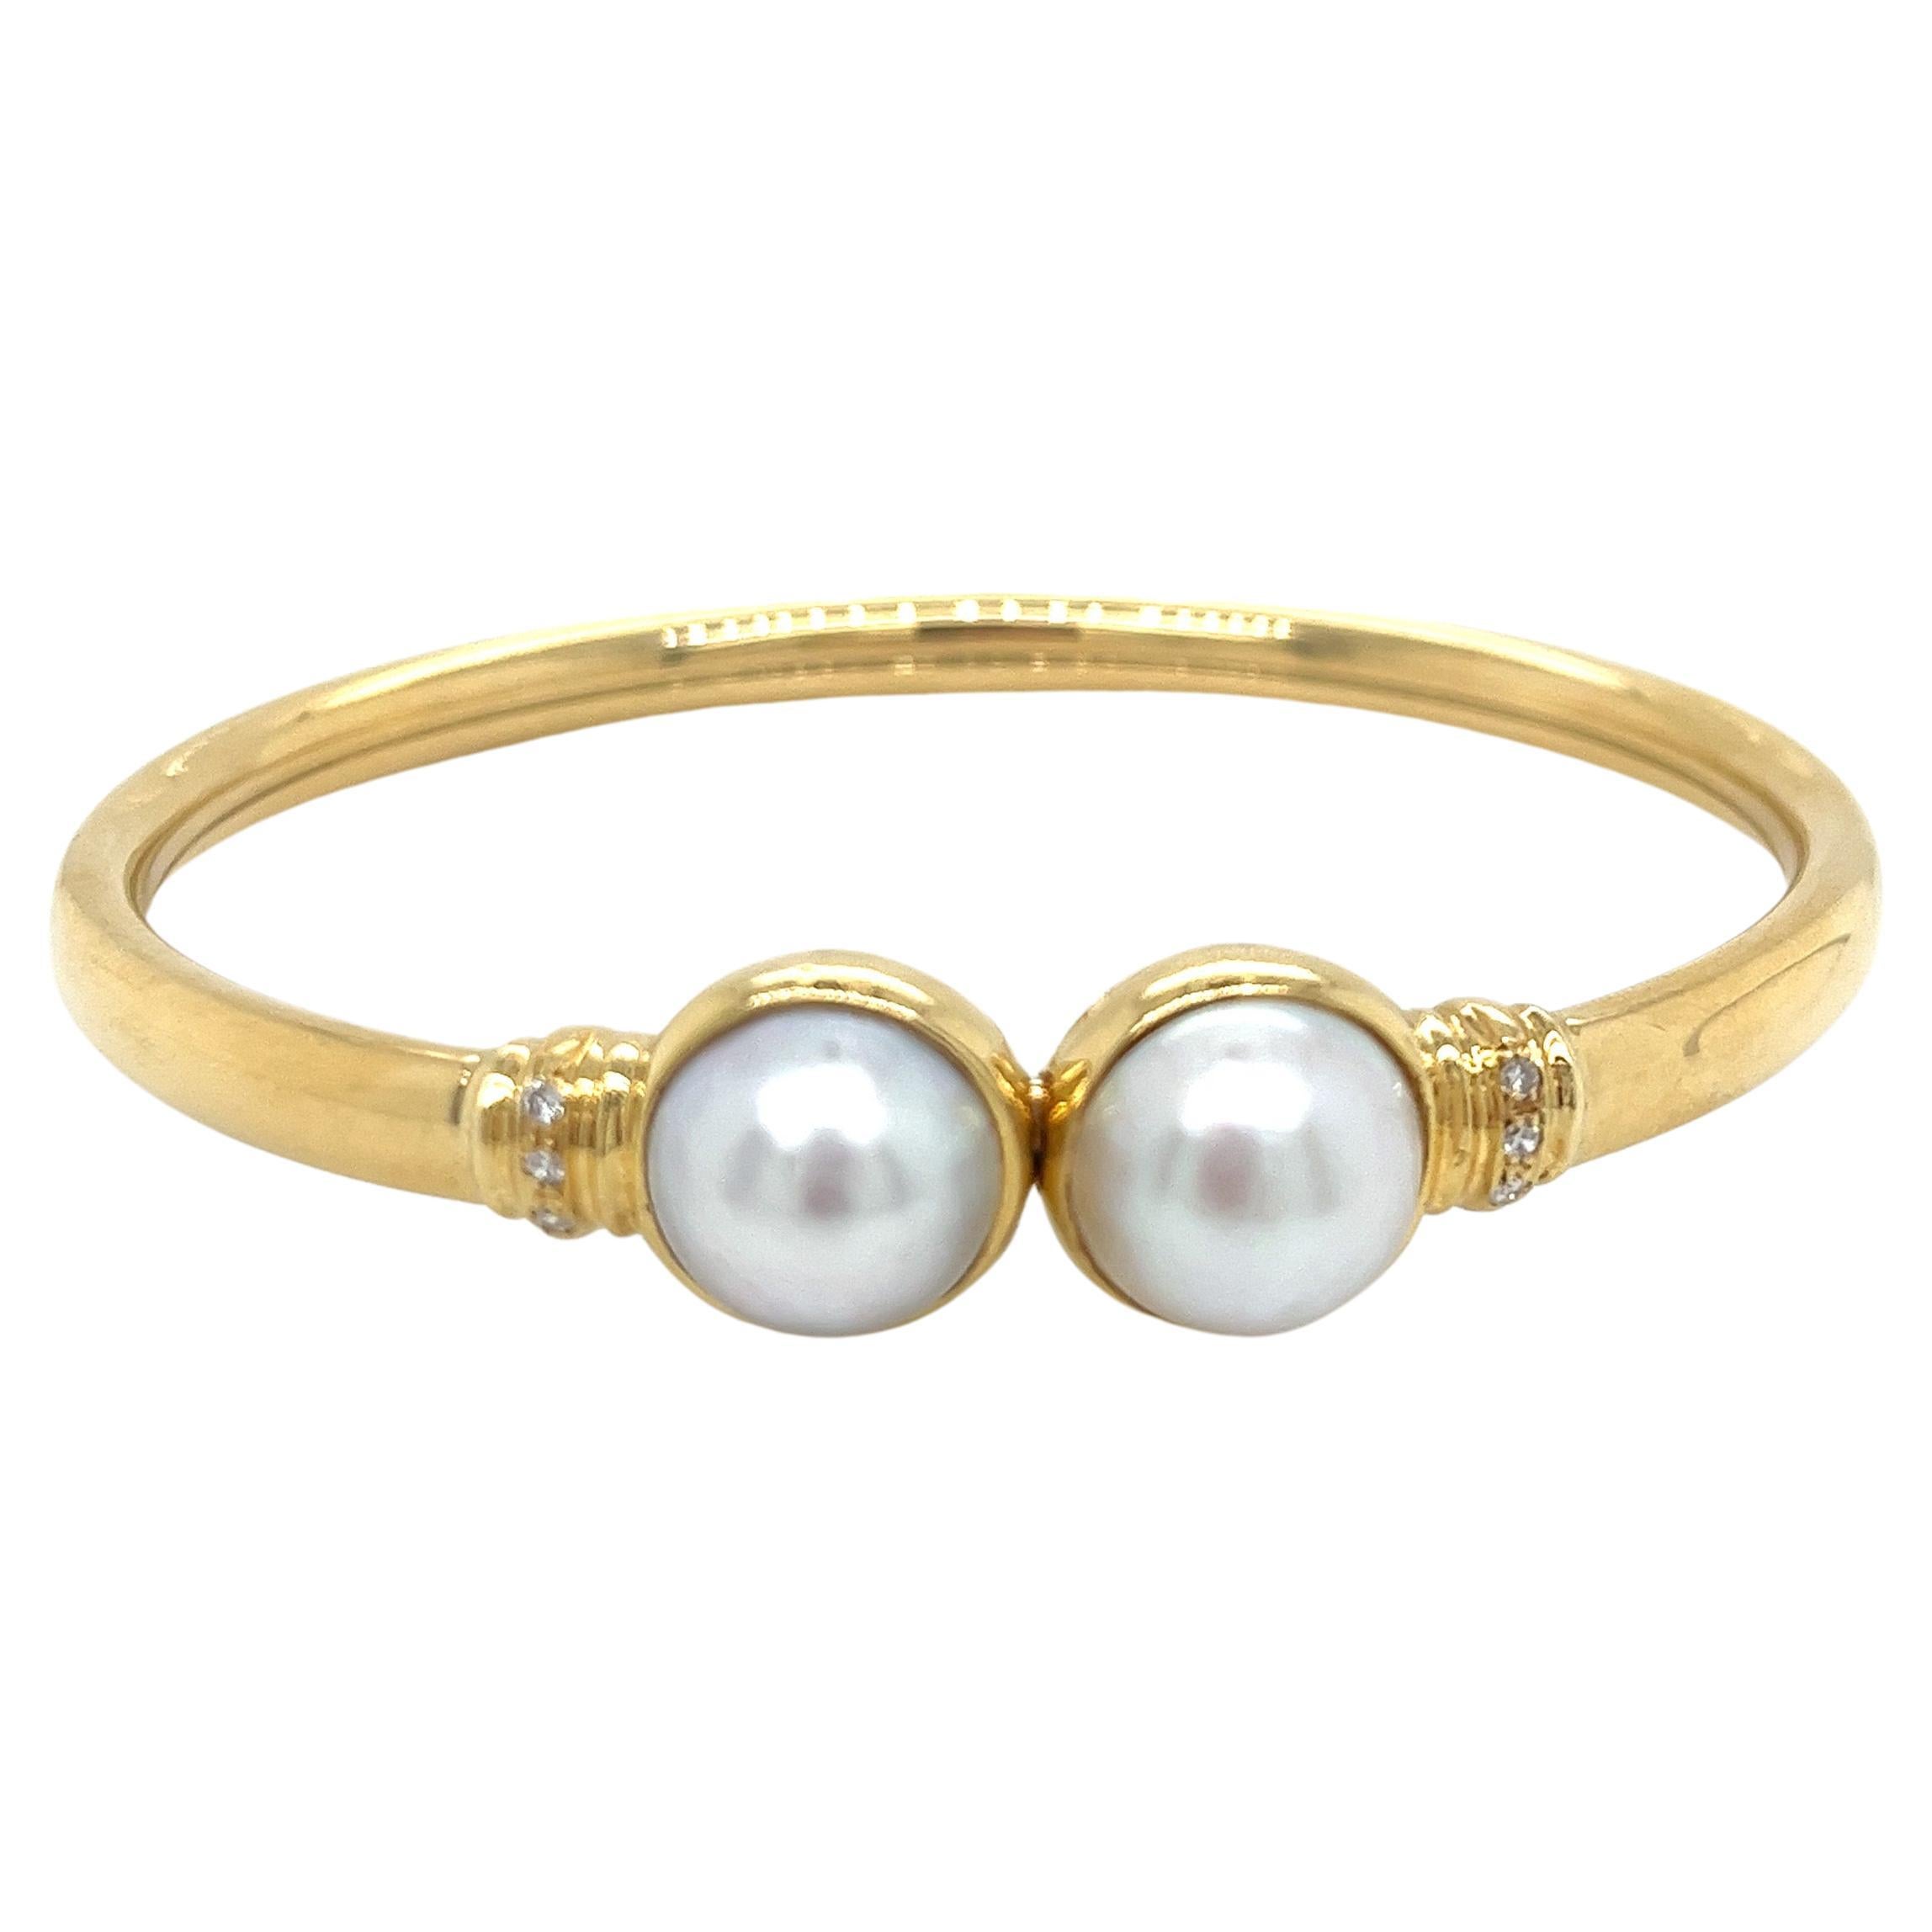 Vintage 18k Yellow Gold Mabe Pearl and Diamond Bangle Bracelet For Sale